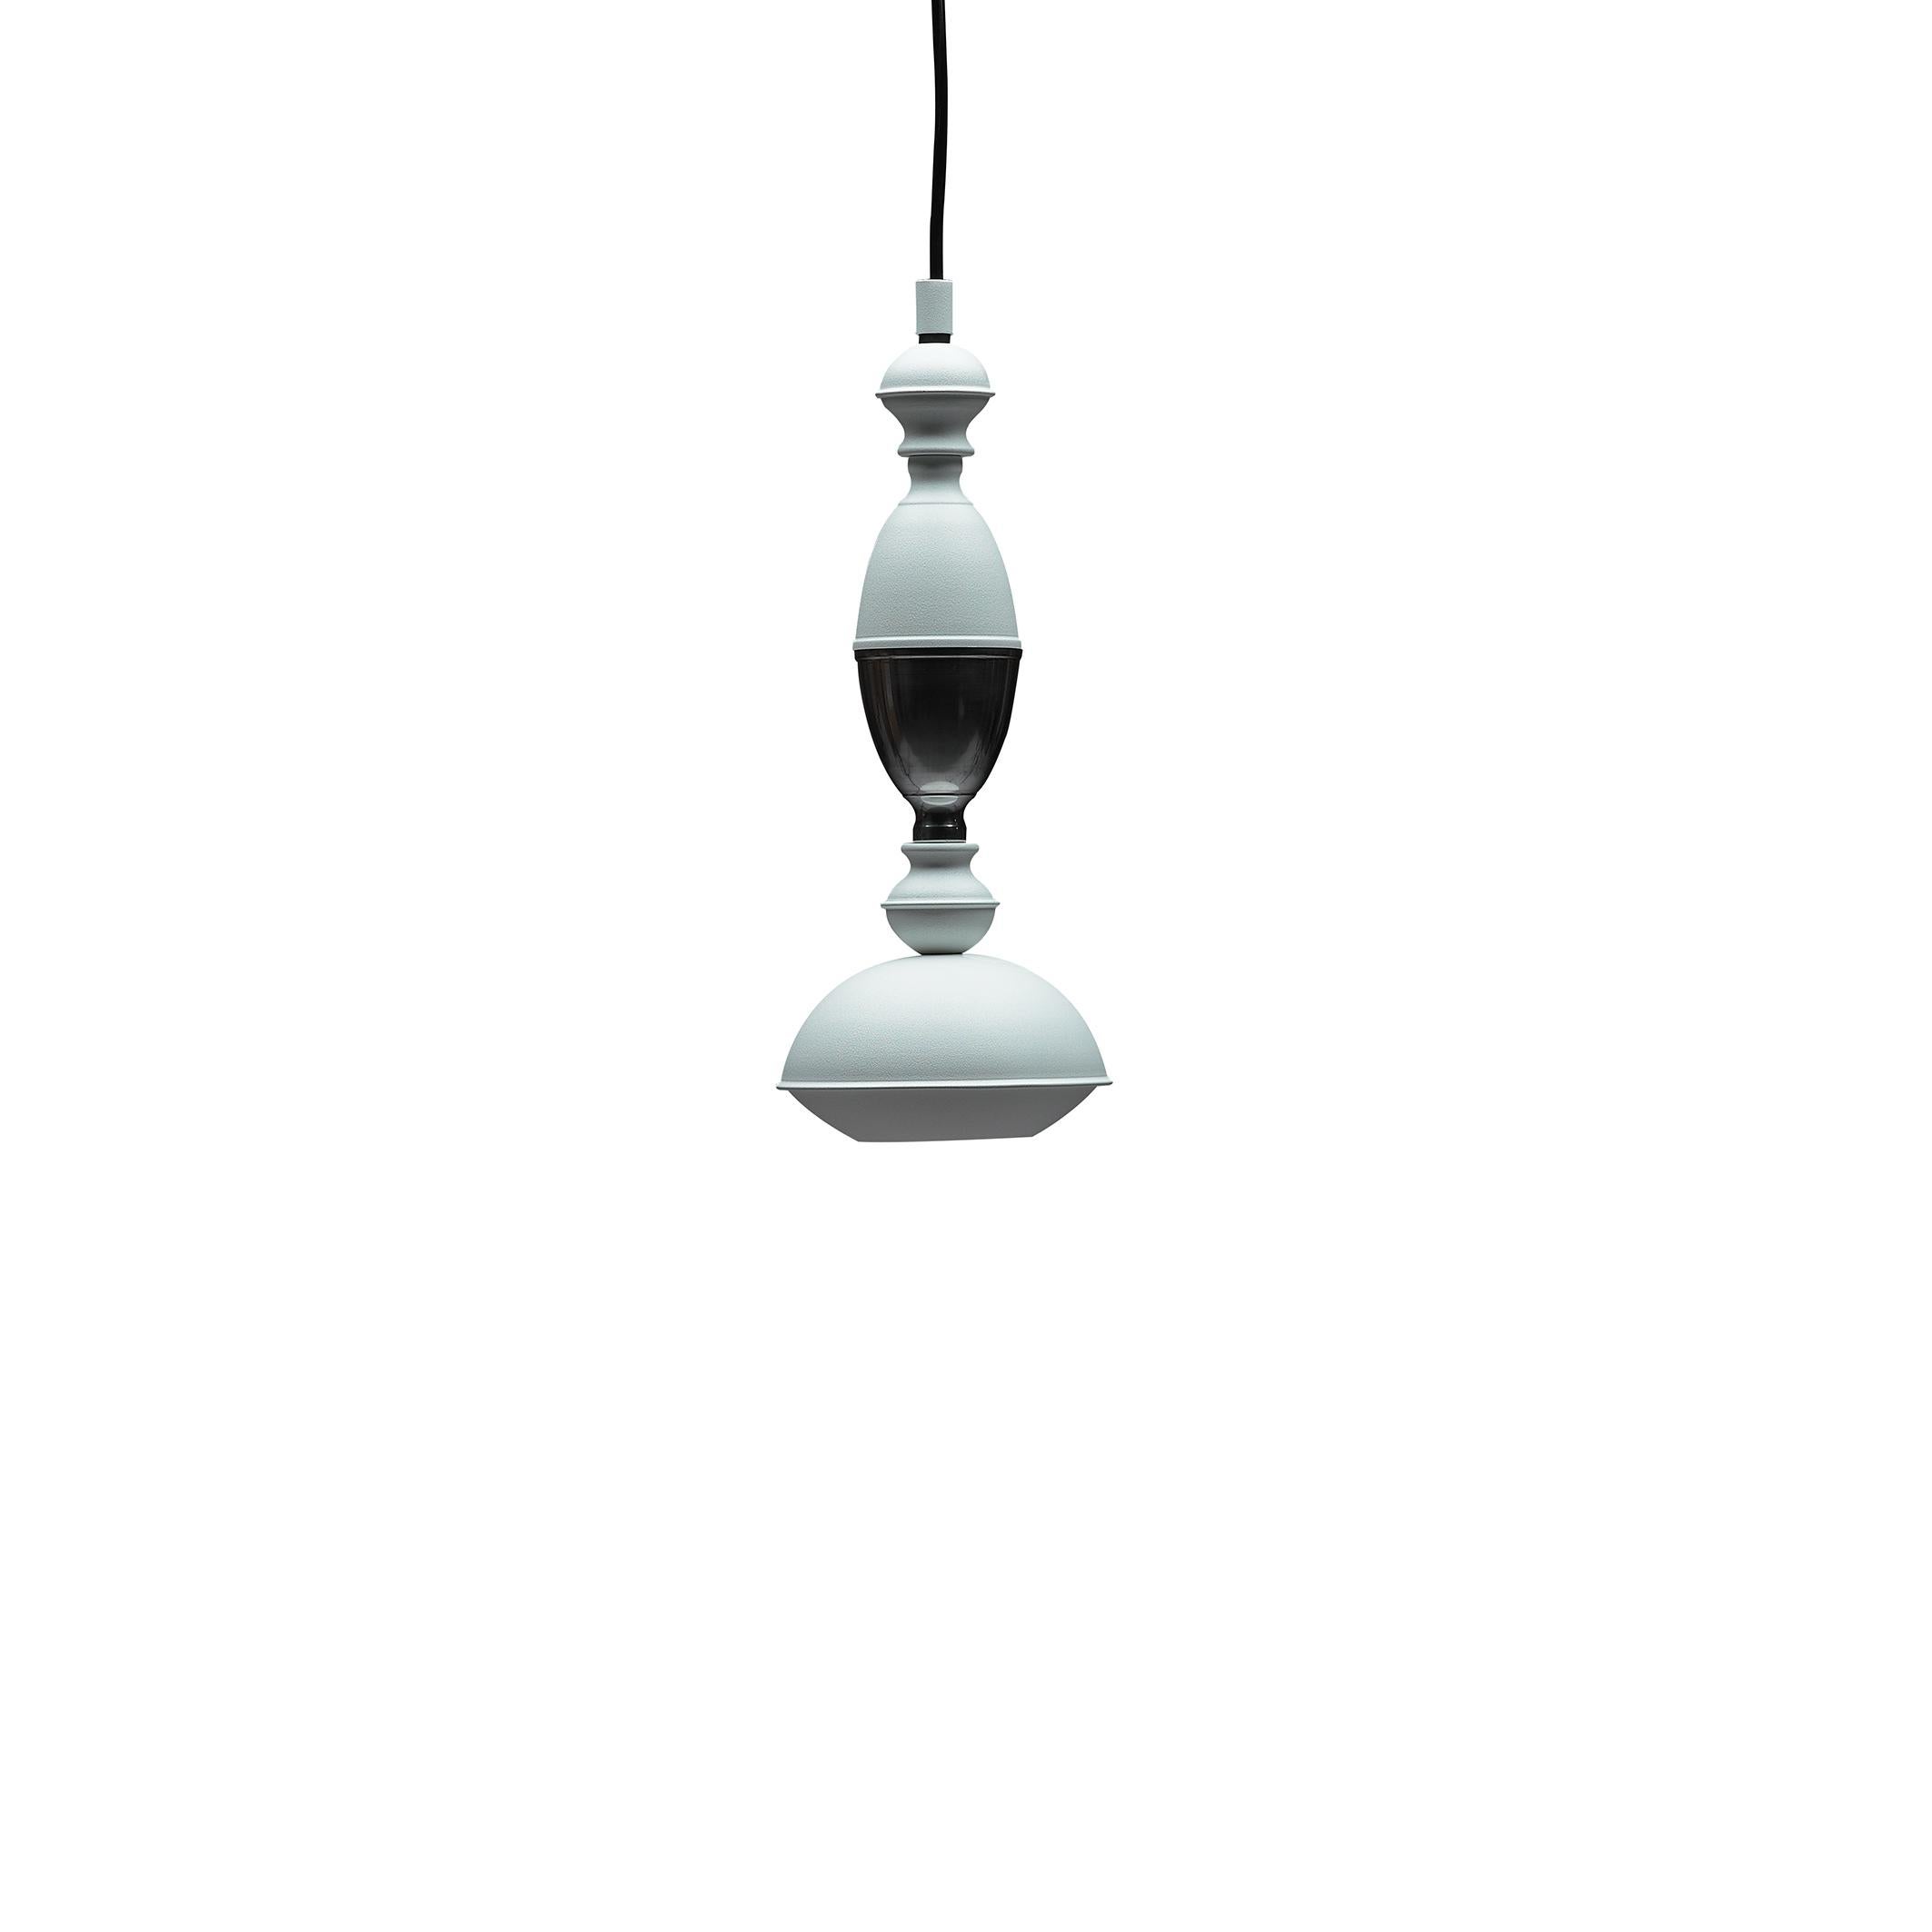 For Sale: White Benben Type 2 Pendant with Chrome Finish by Jacco Maris